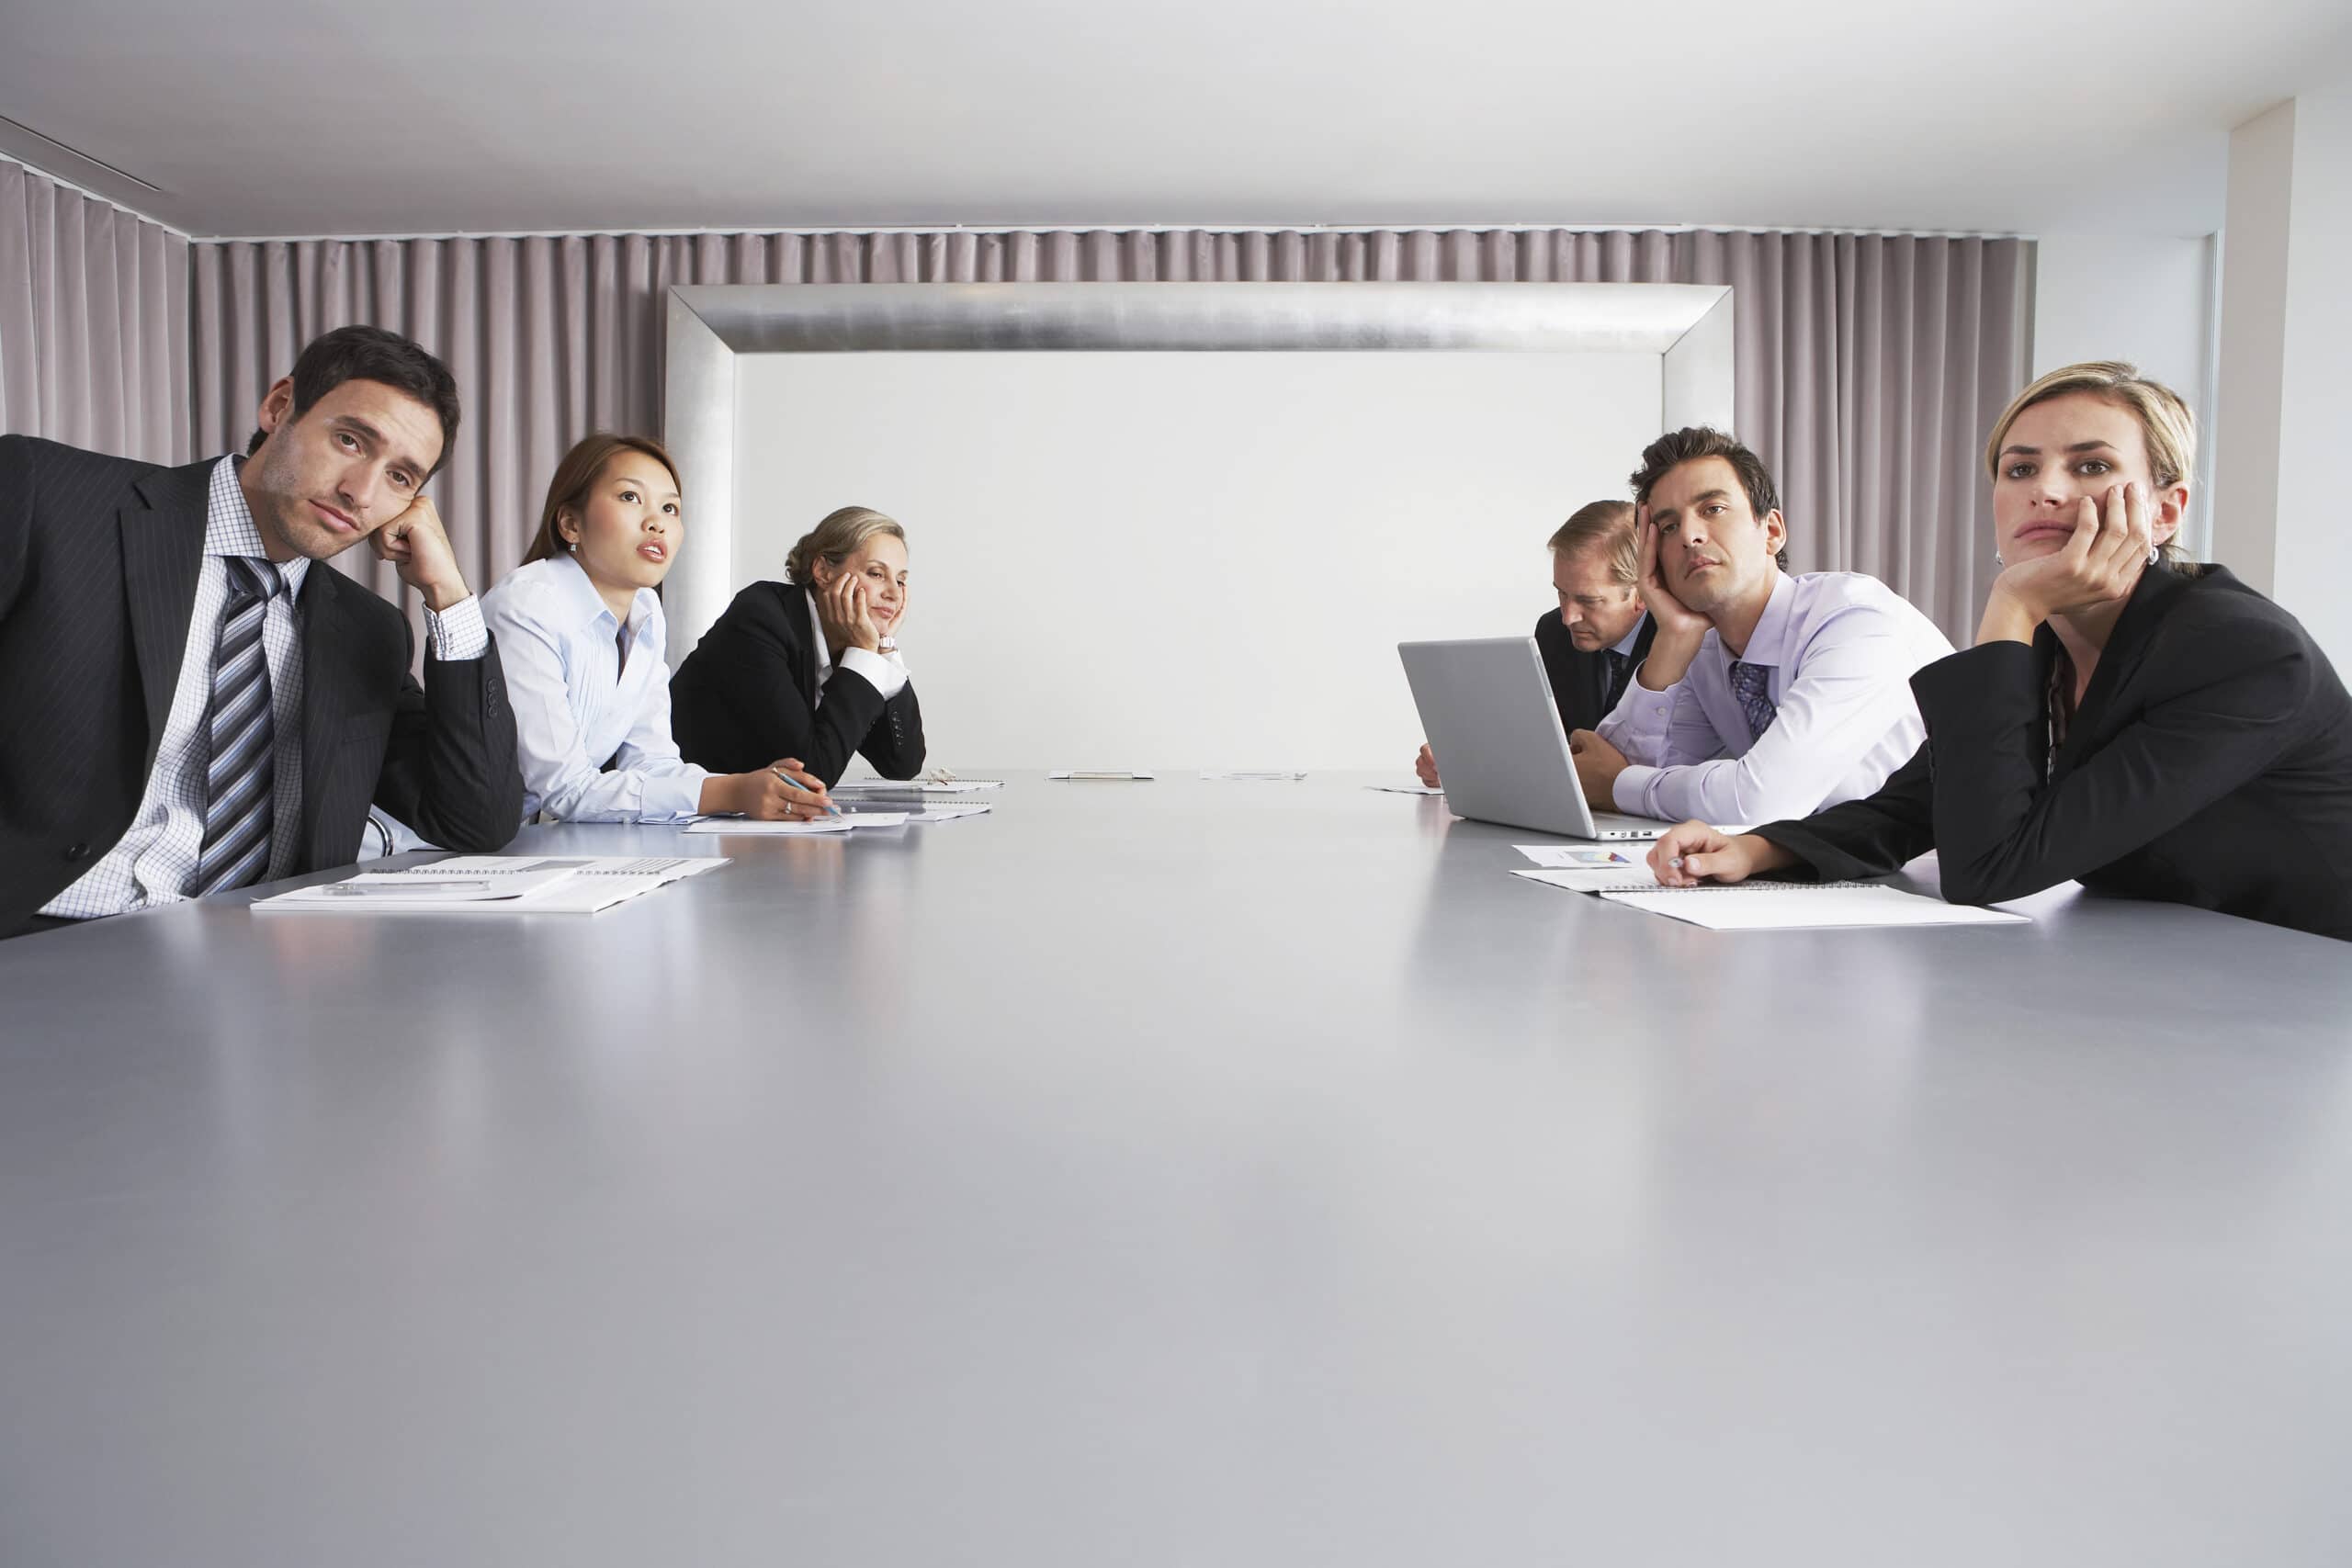 Bored multiethnic business people sitting in conference room